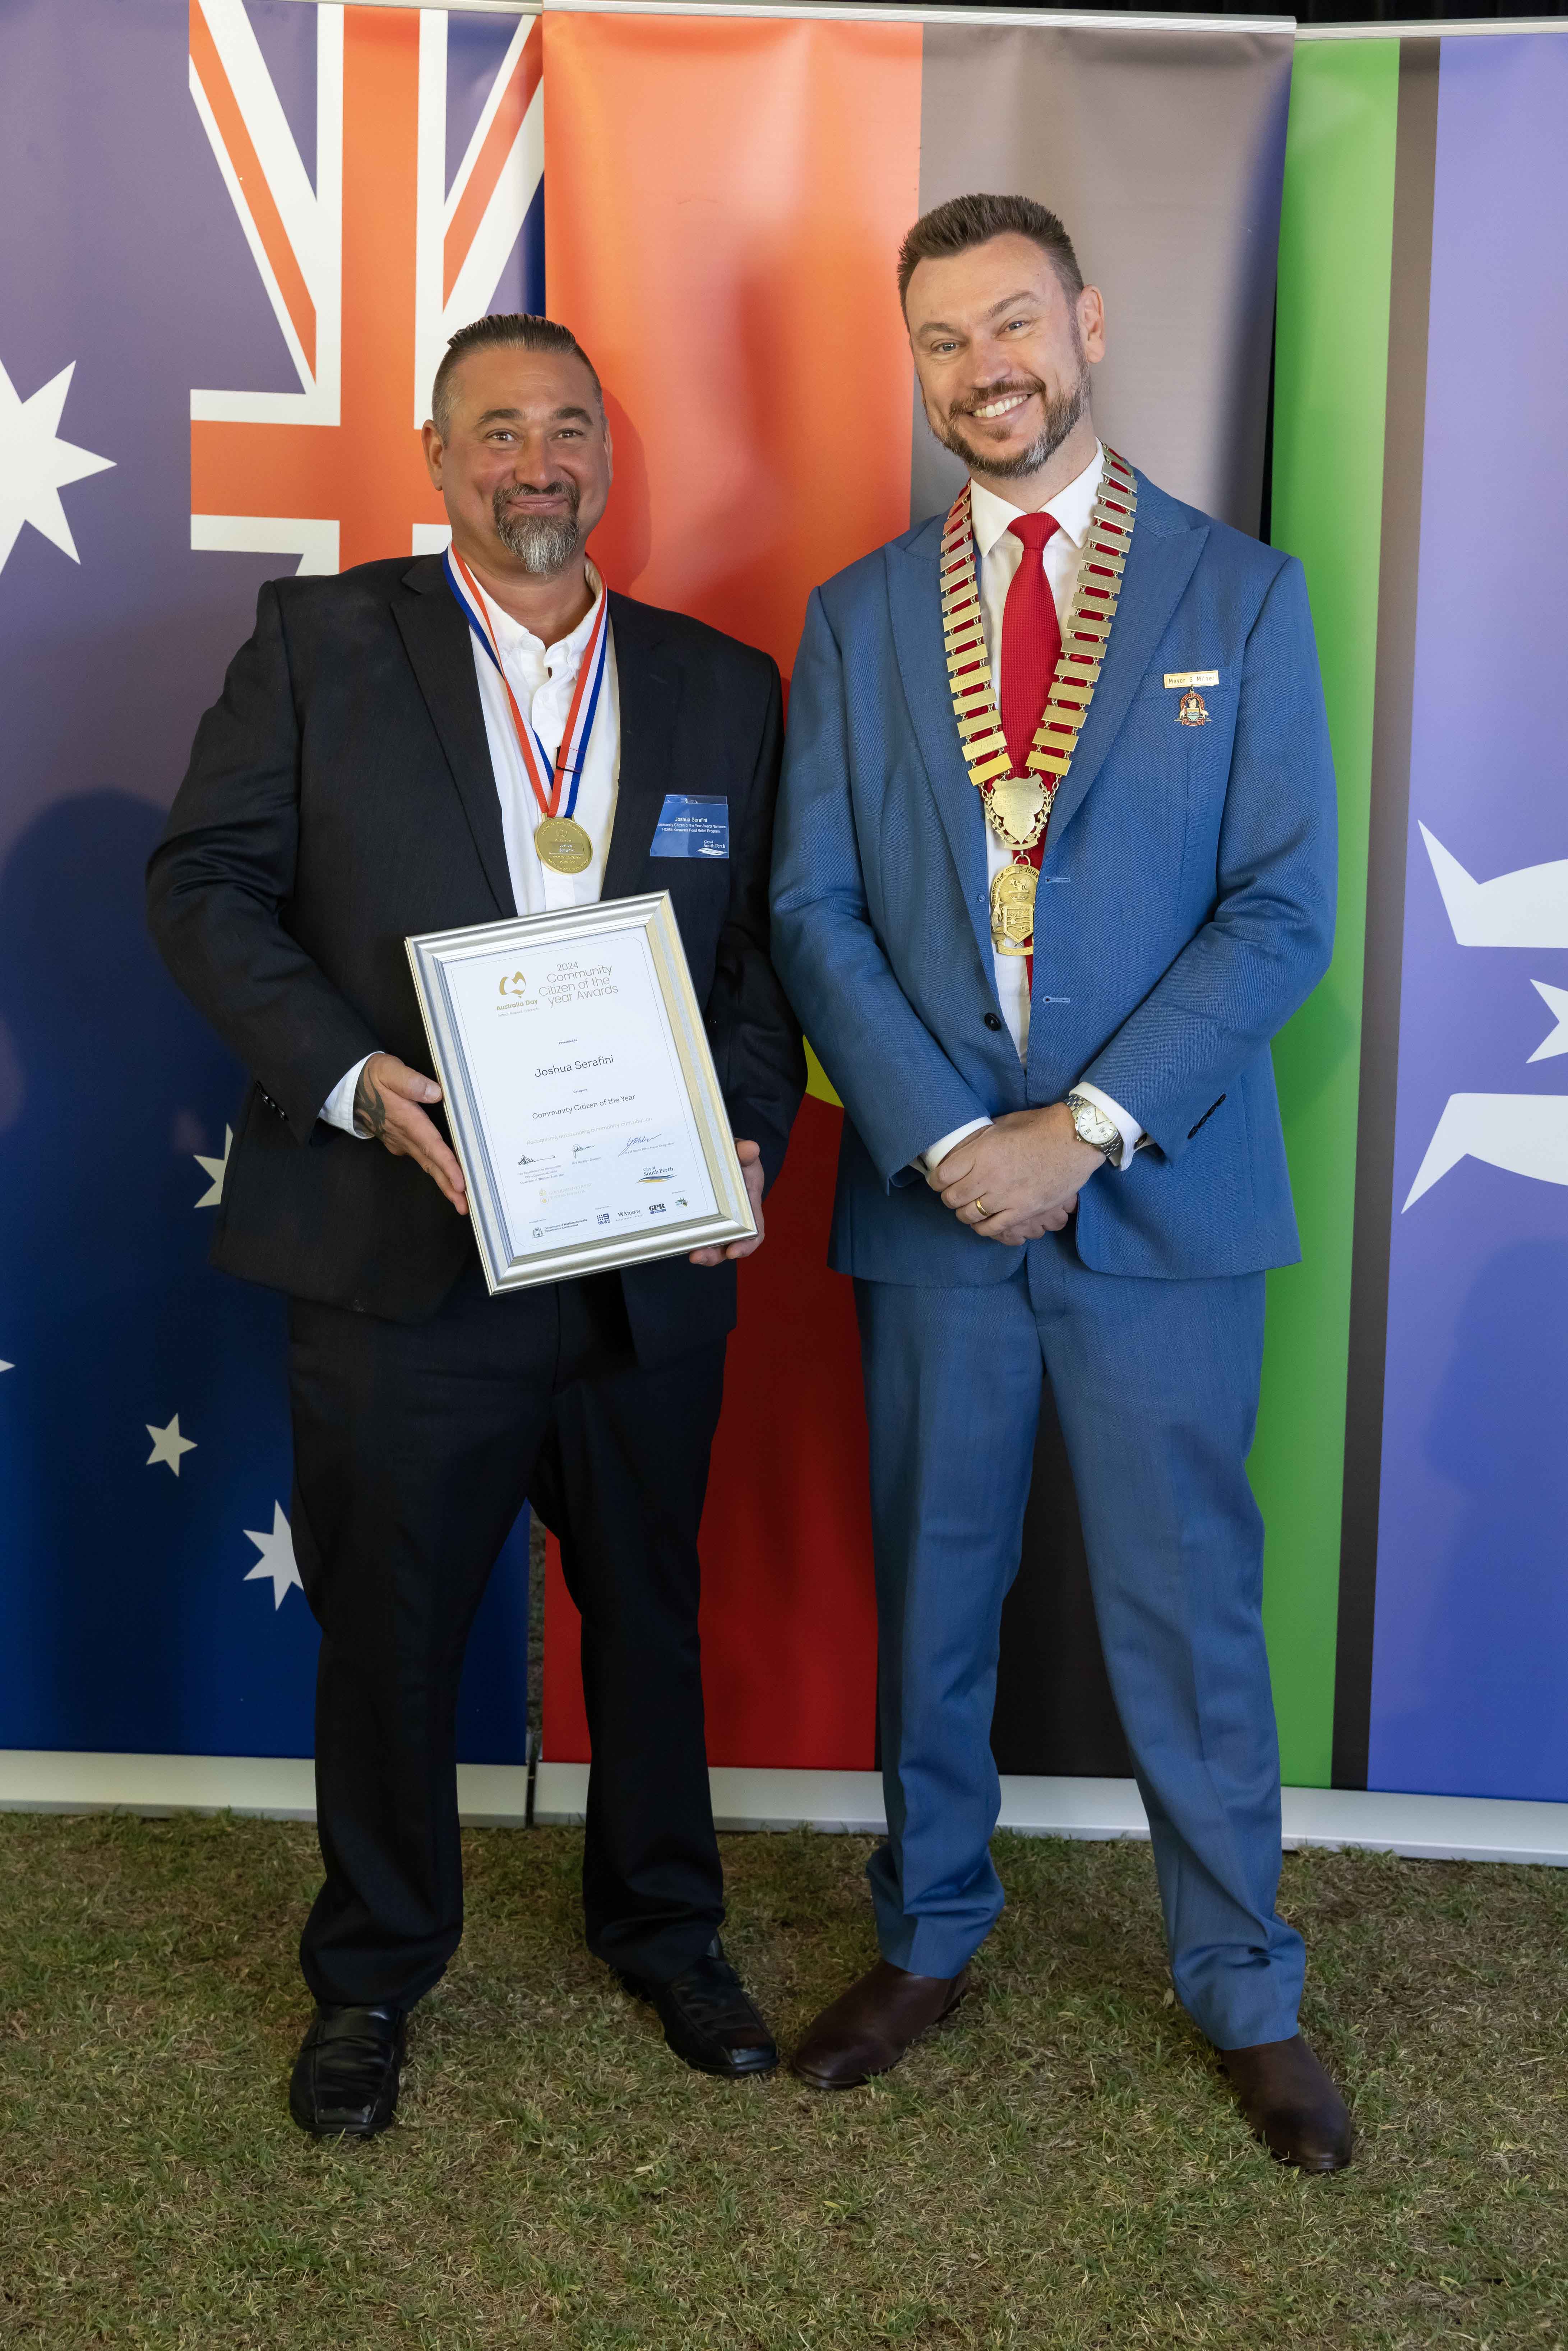 Two men smiling and holding a framed certificate.